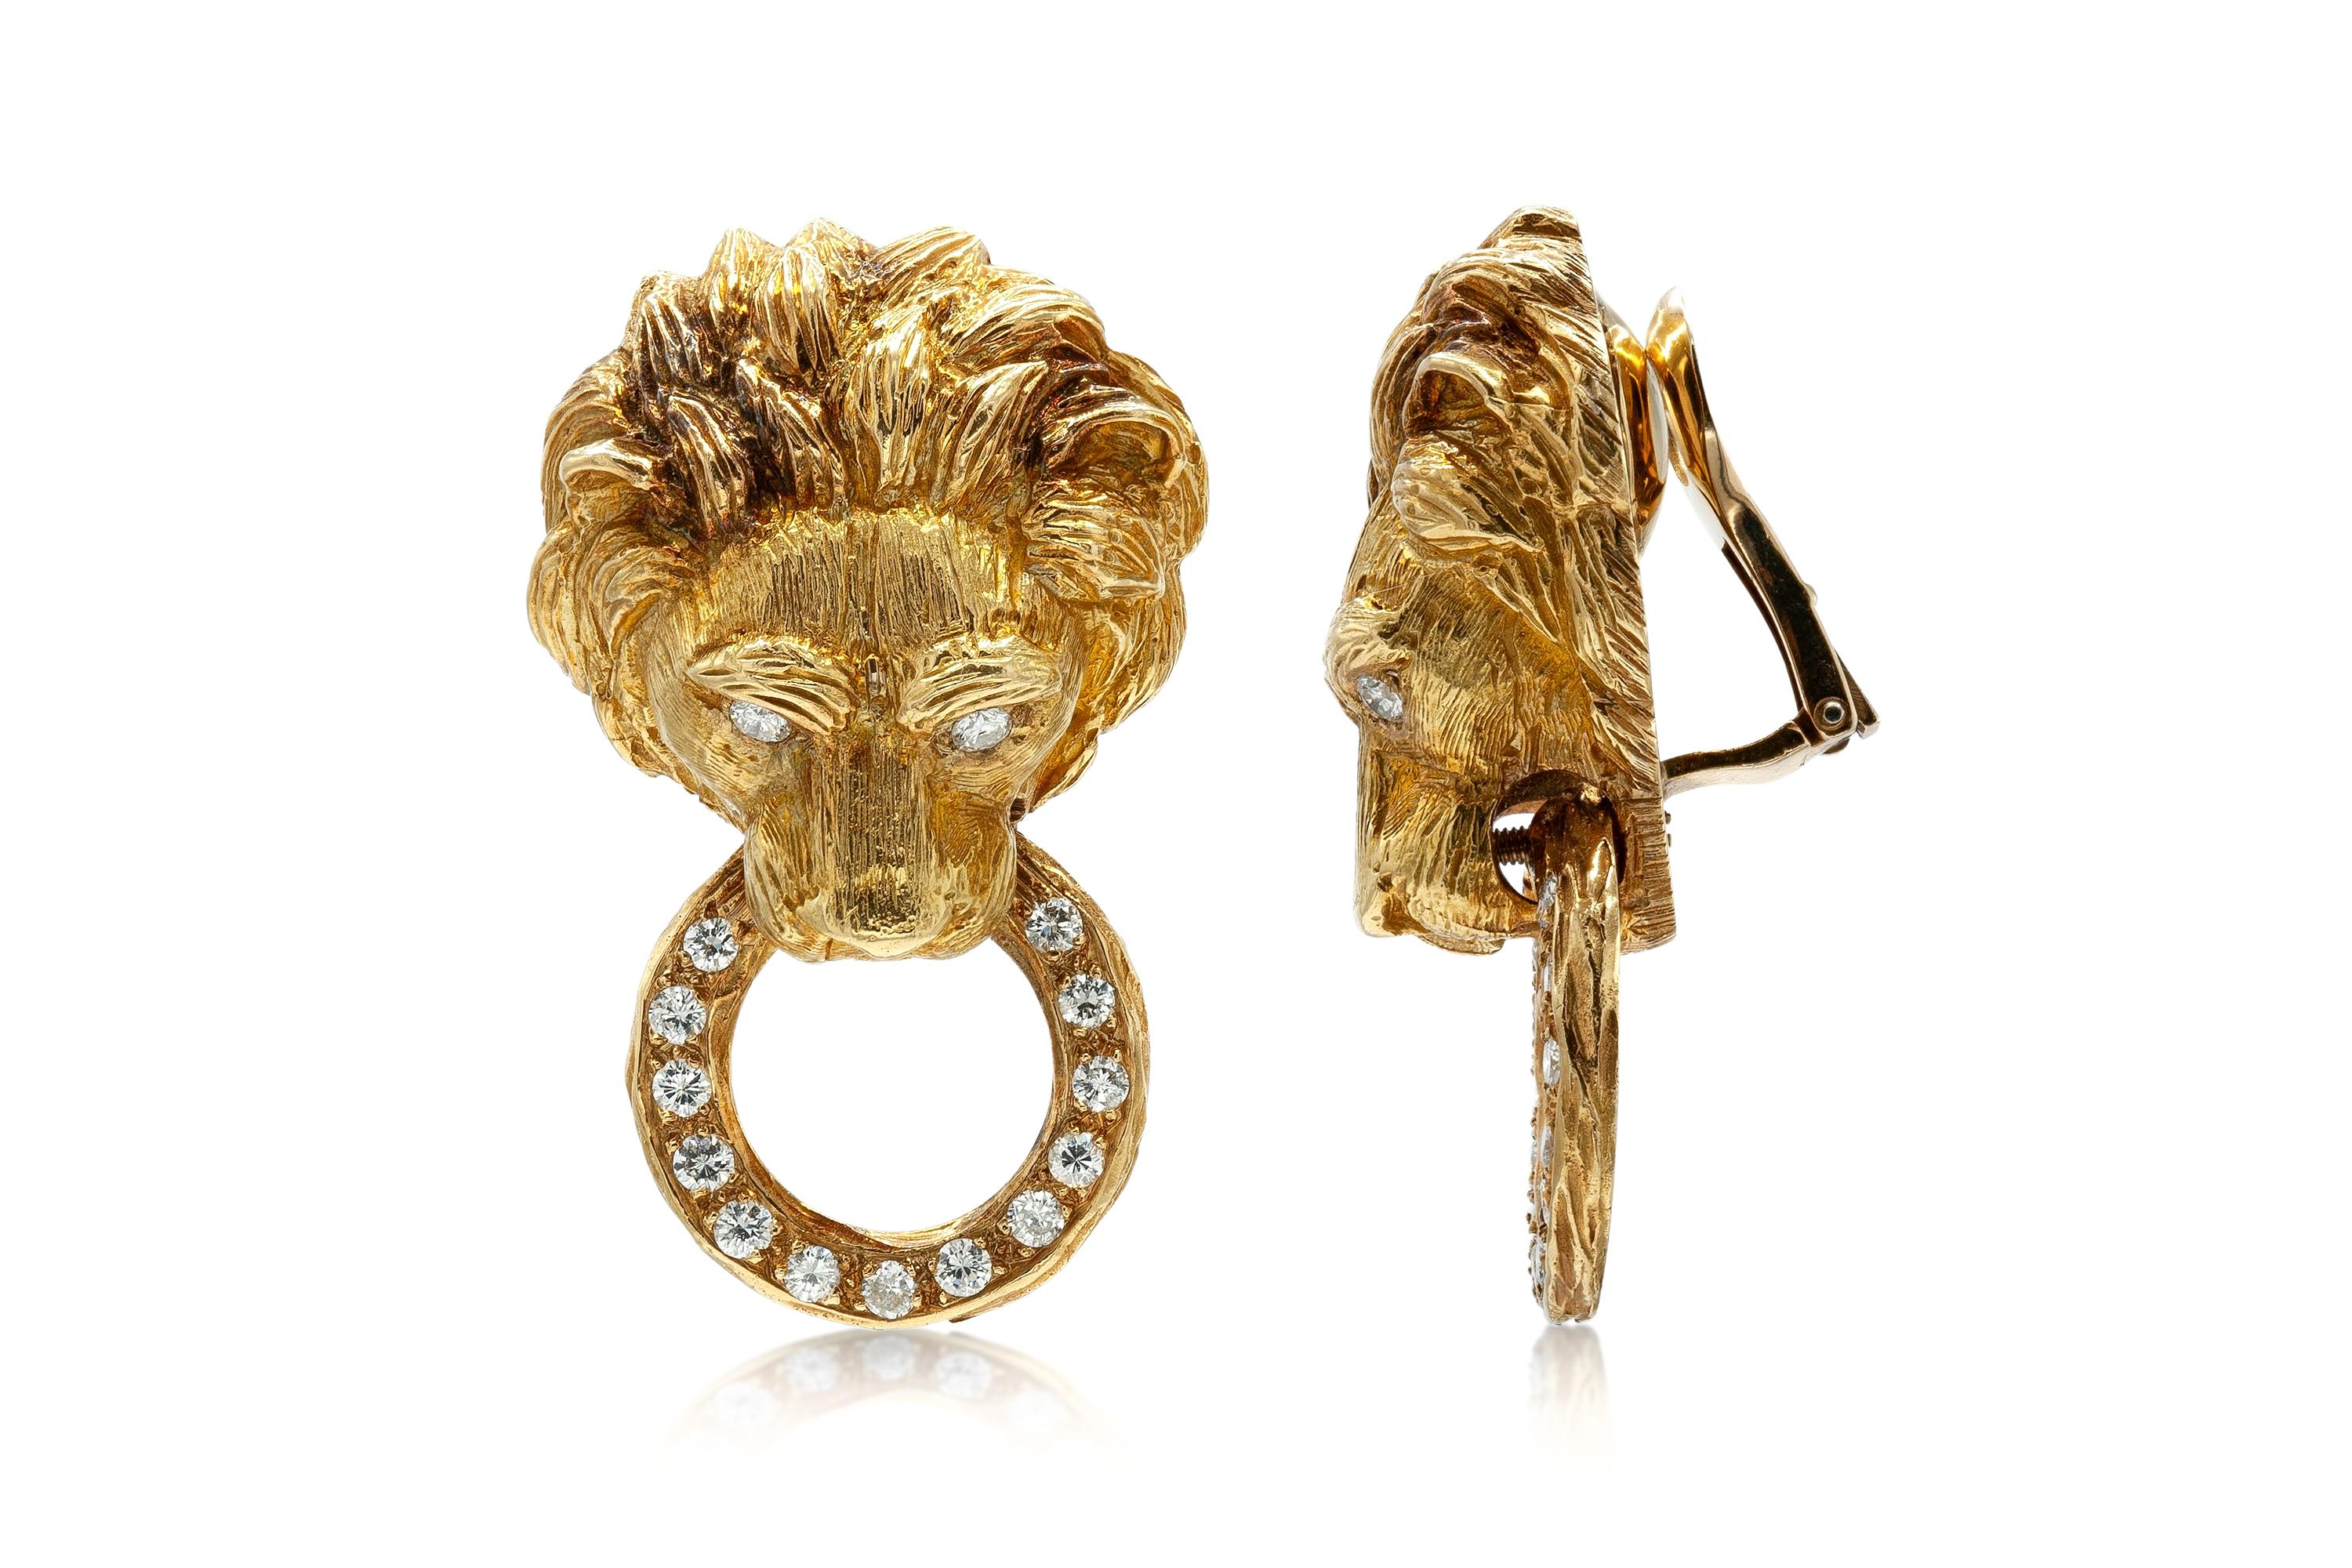 Finely crafted in 18K yellow gold featuring round-brilliant cut diamonds weighing approximately 1.20 carats total. 
Circa 1970s.
1 3/4 inch (from top of lion's head to bottom of ring) x 1 inch (widest point of lion's head).
41.7 grams. 
Signed and